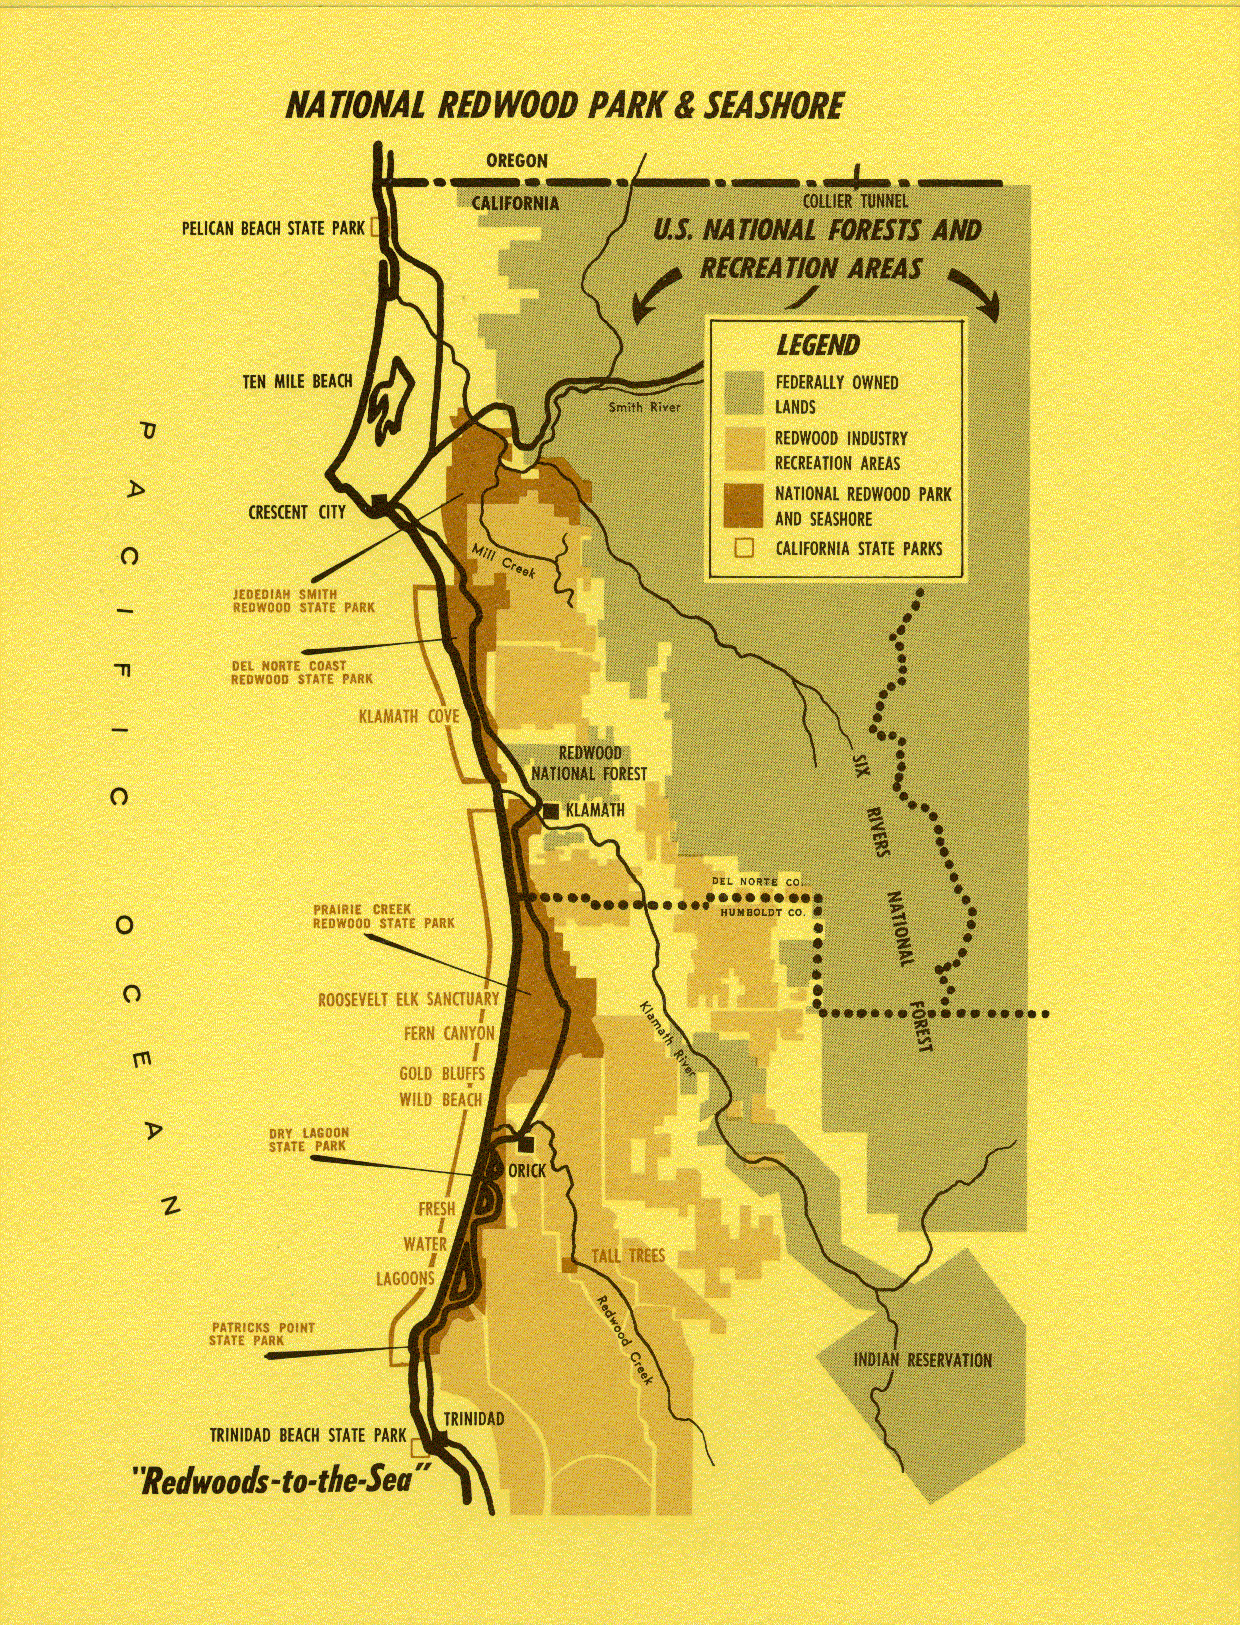 A map of Redwood National Park